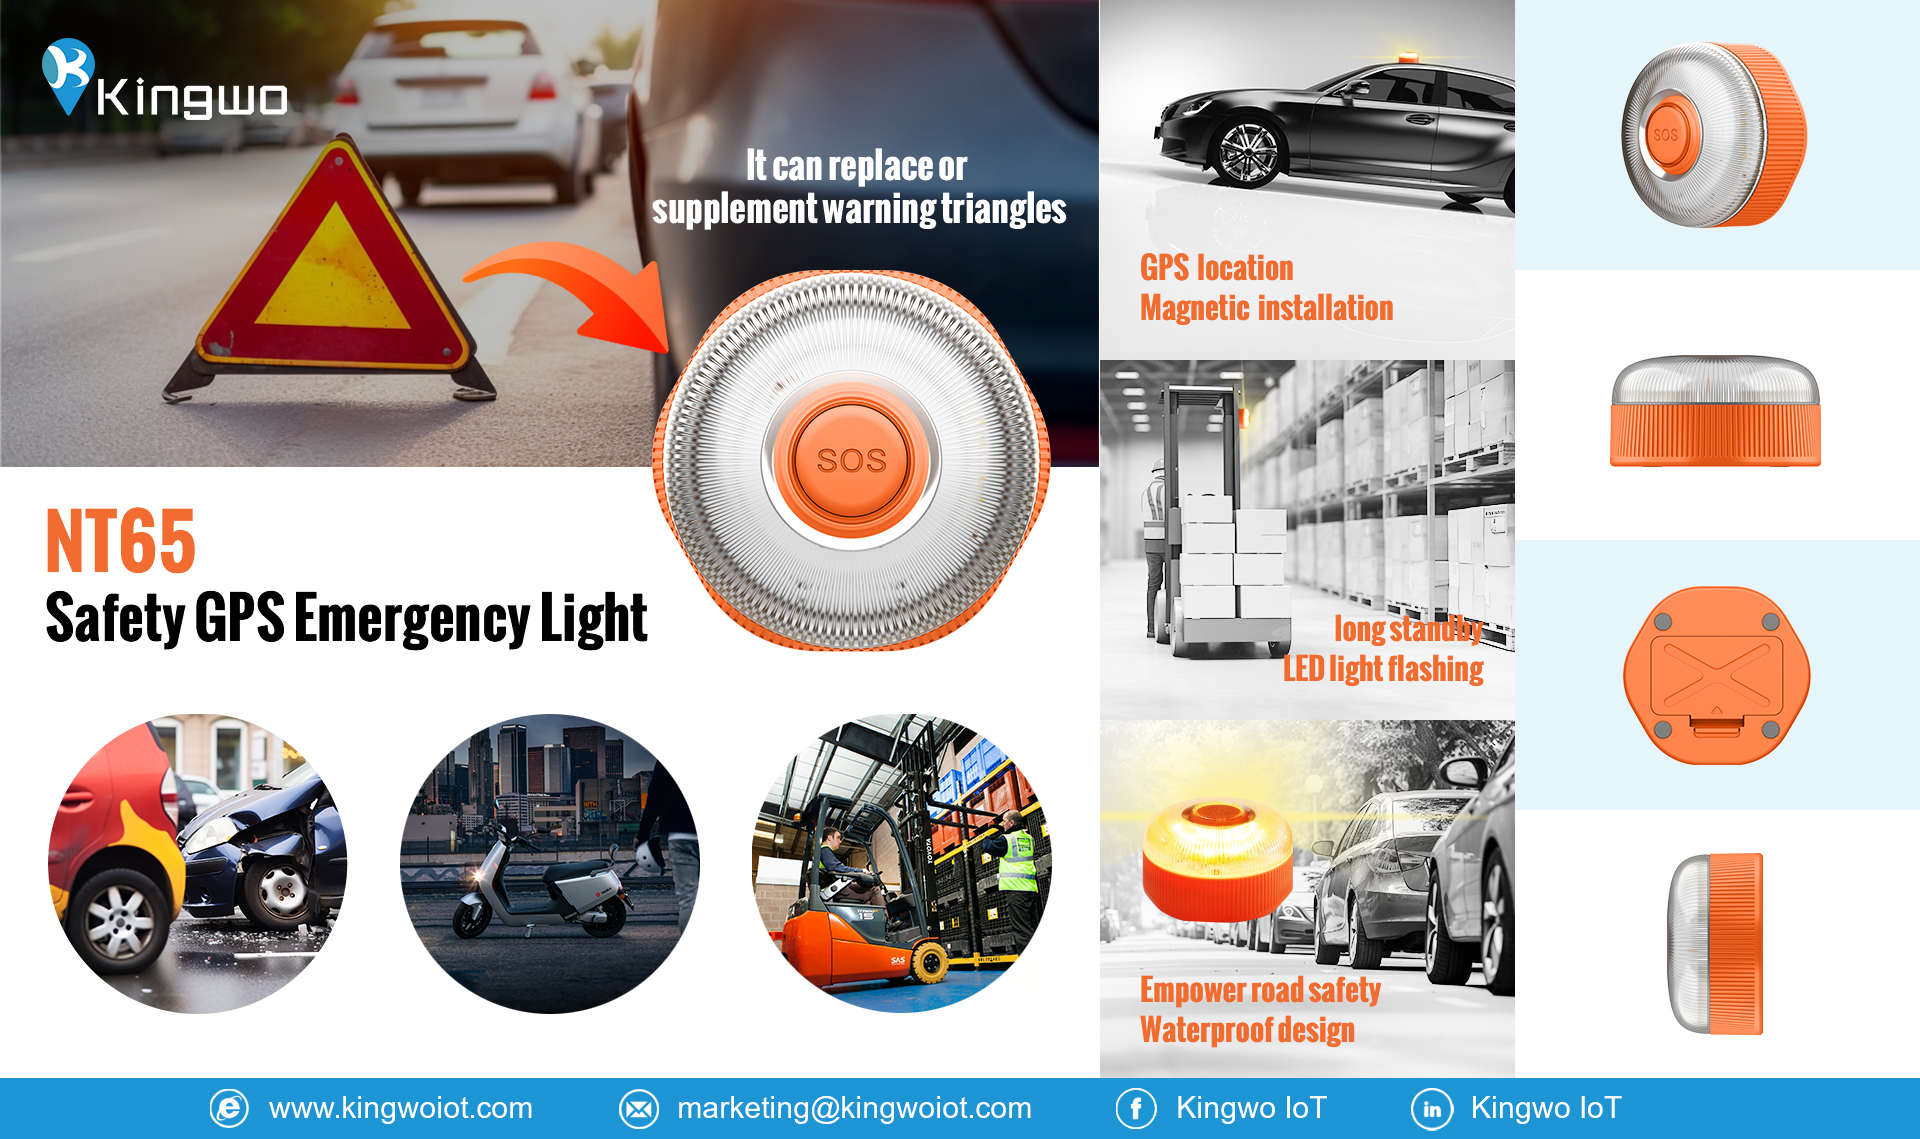 Kingwo New Launched Safety Emergency Traffic Light NT65 committed to solving traffic and road emergency solutions - COMPANY NEWS - 1